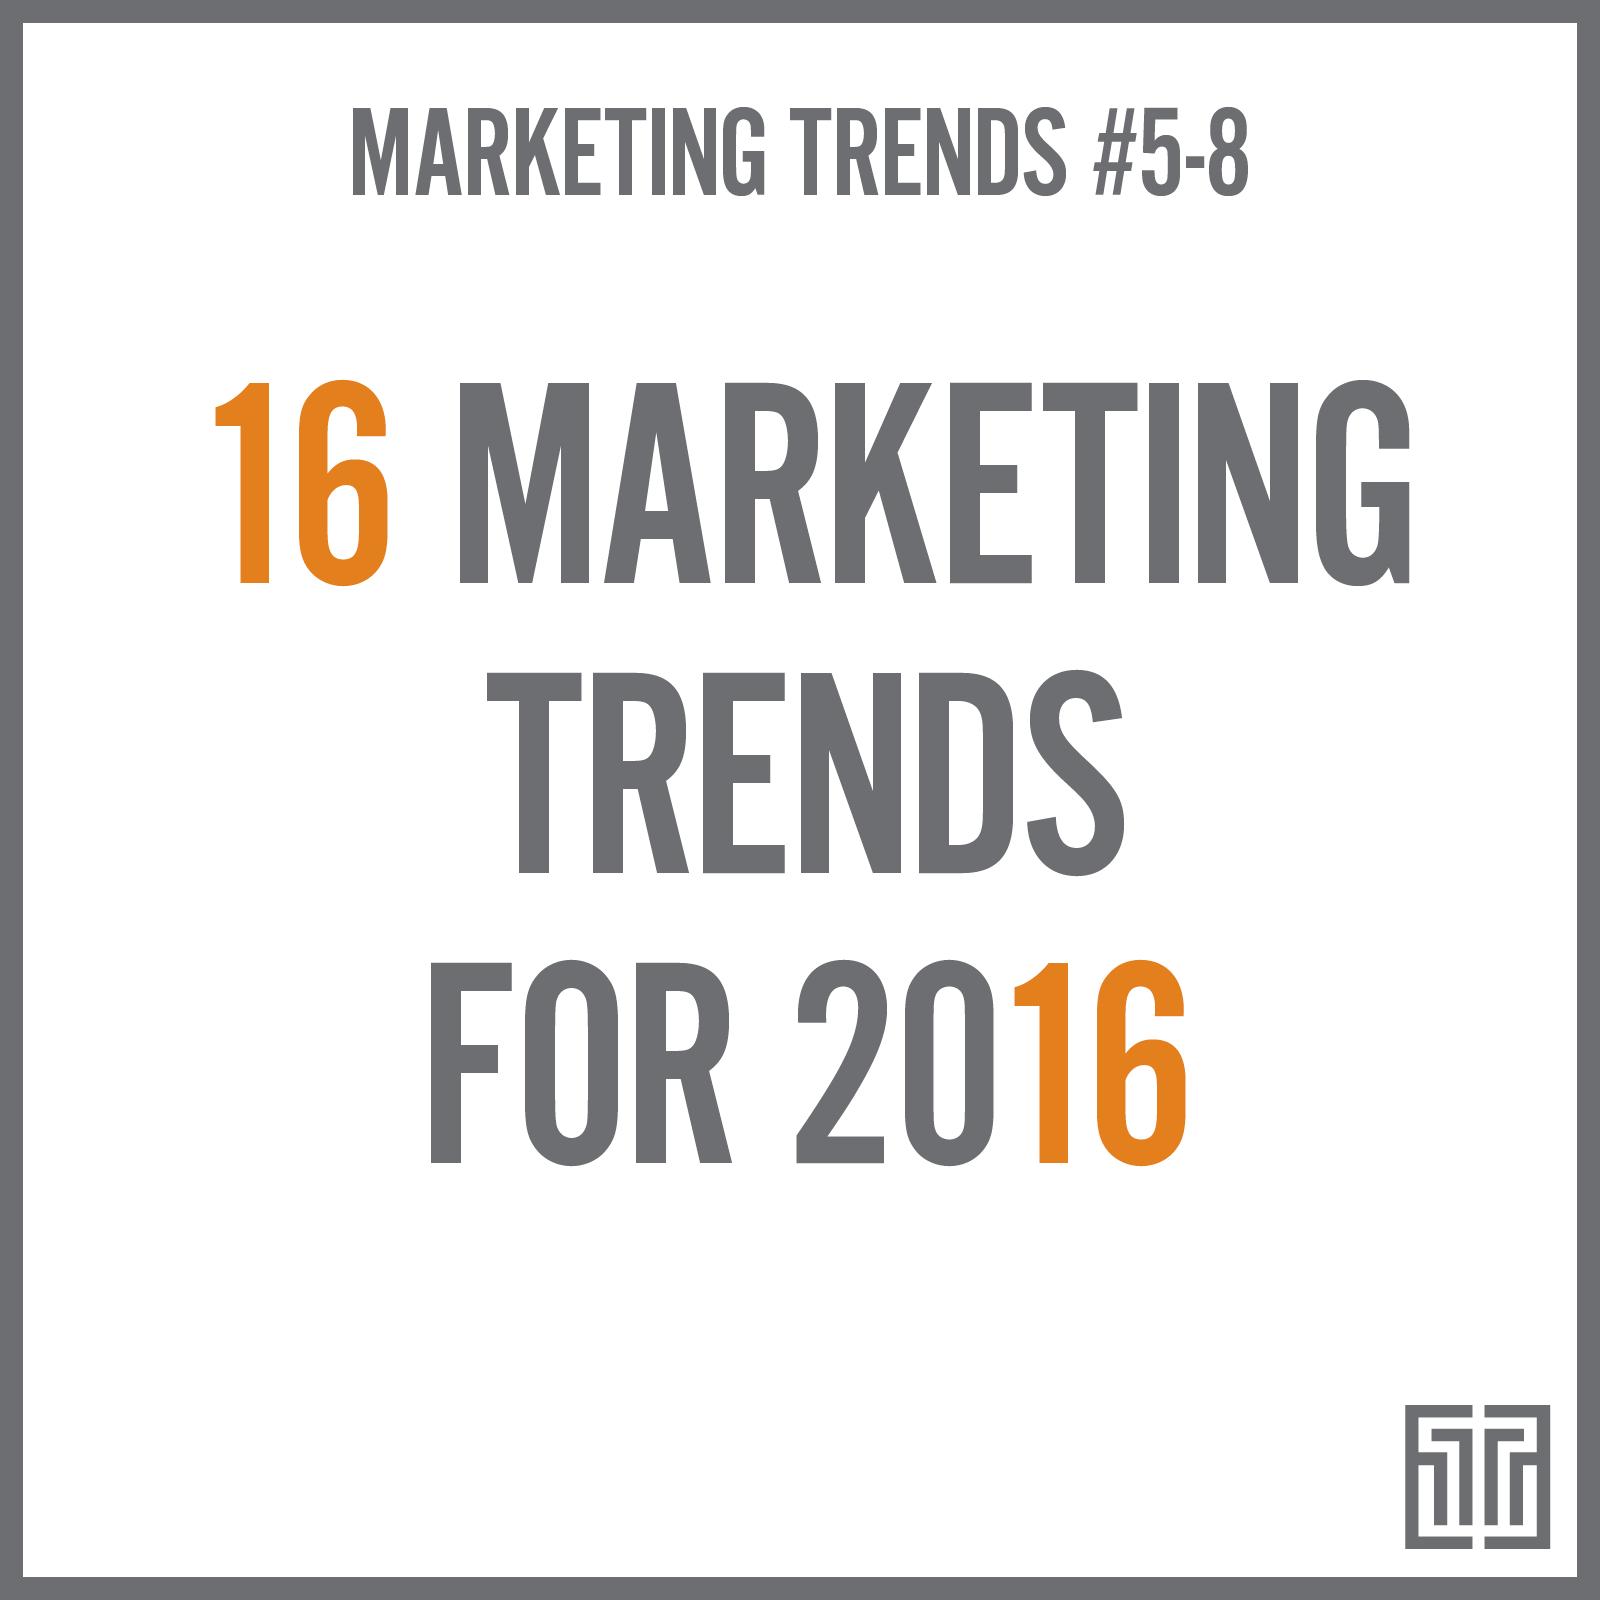 16 Marketing Trends for 2016: Trends 5-8